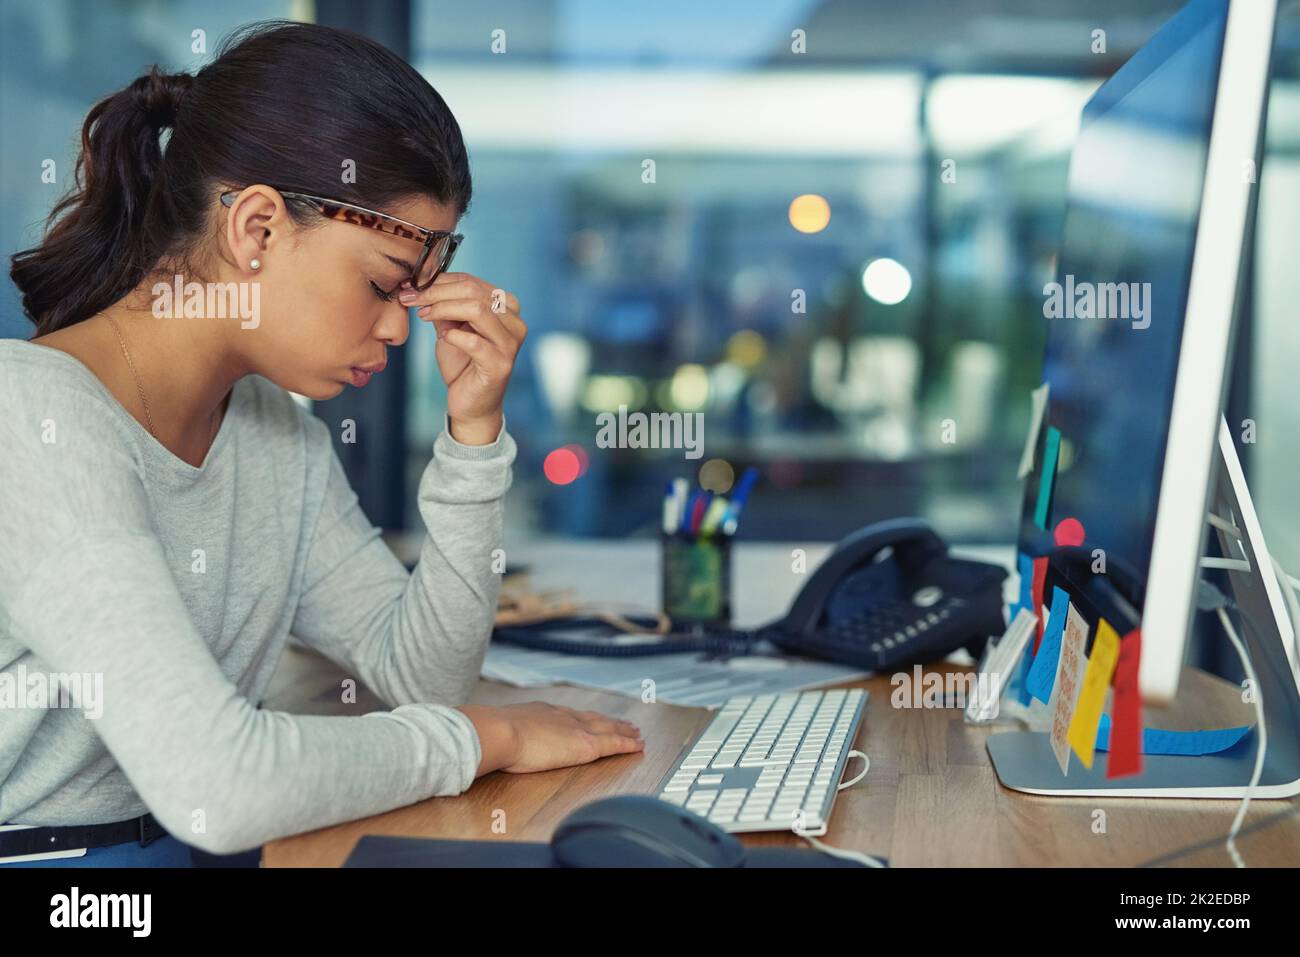 This pain is completely unbearable. Shot of a young businesswoman looking stressed out in an office. Stock Photo